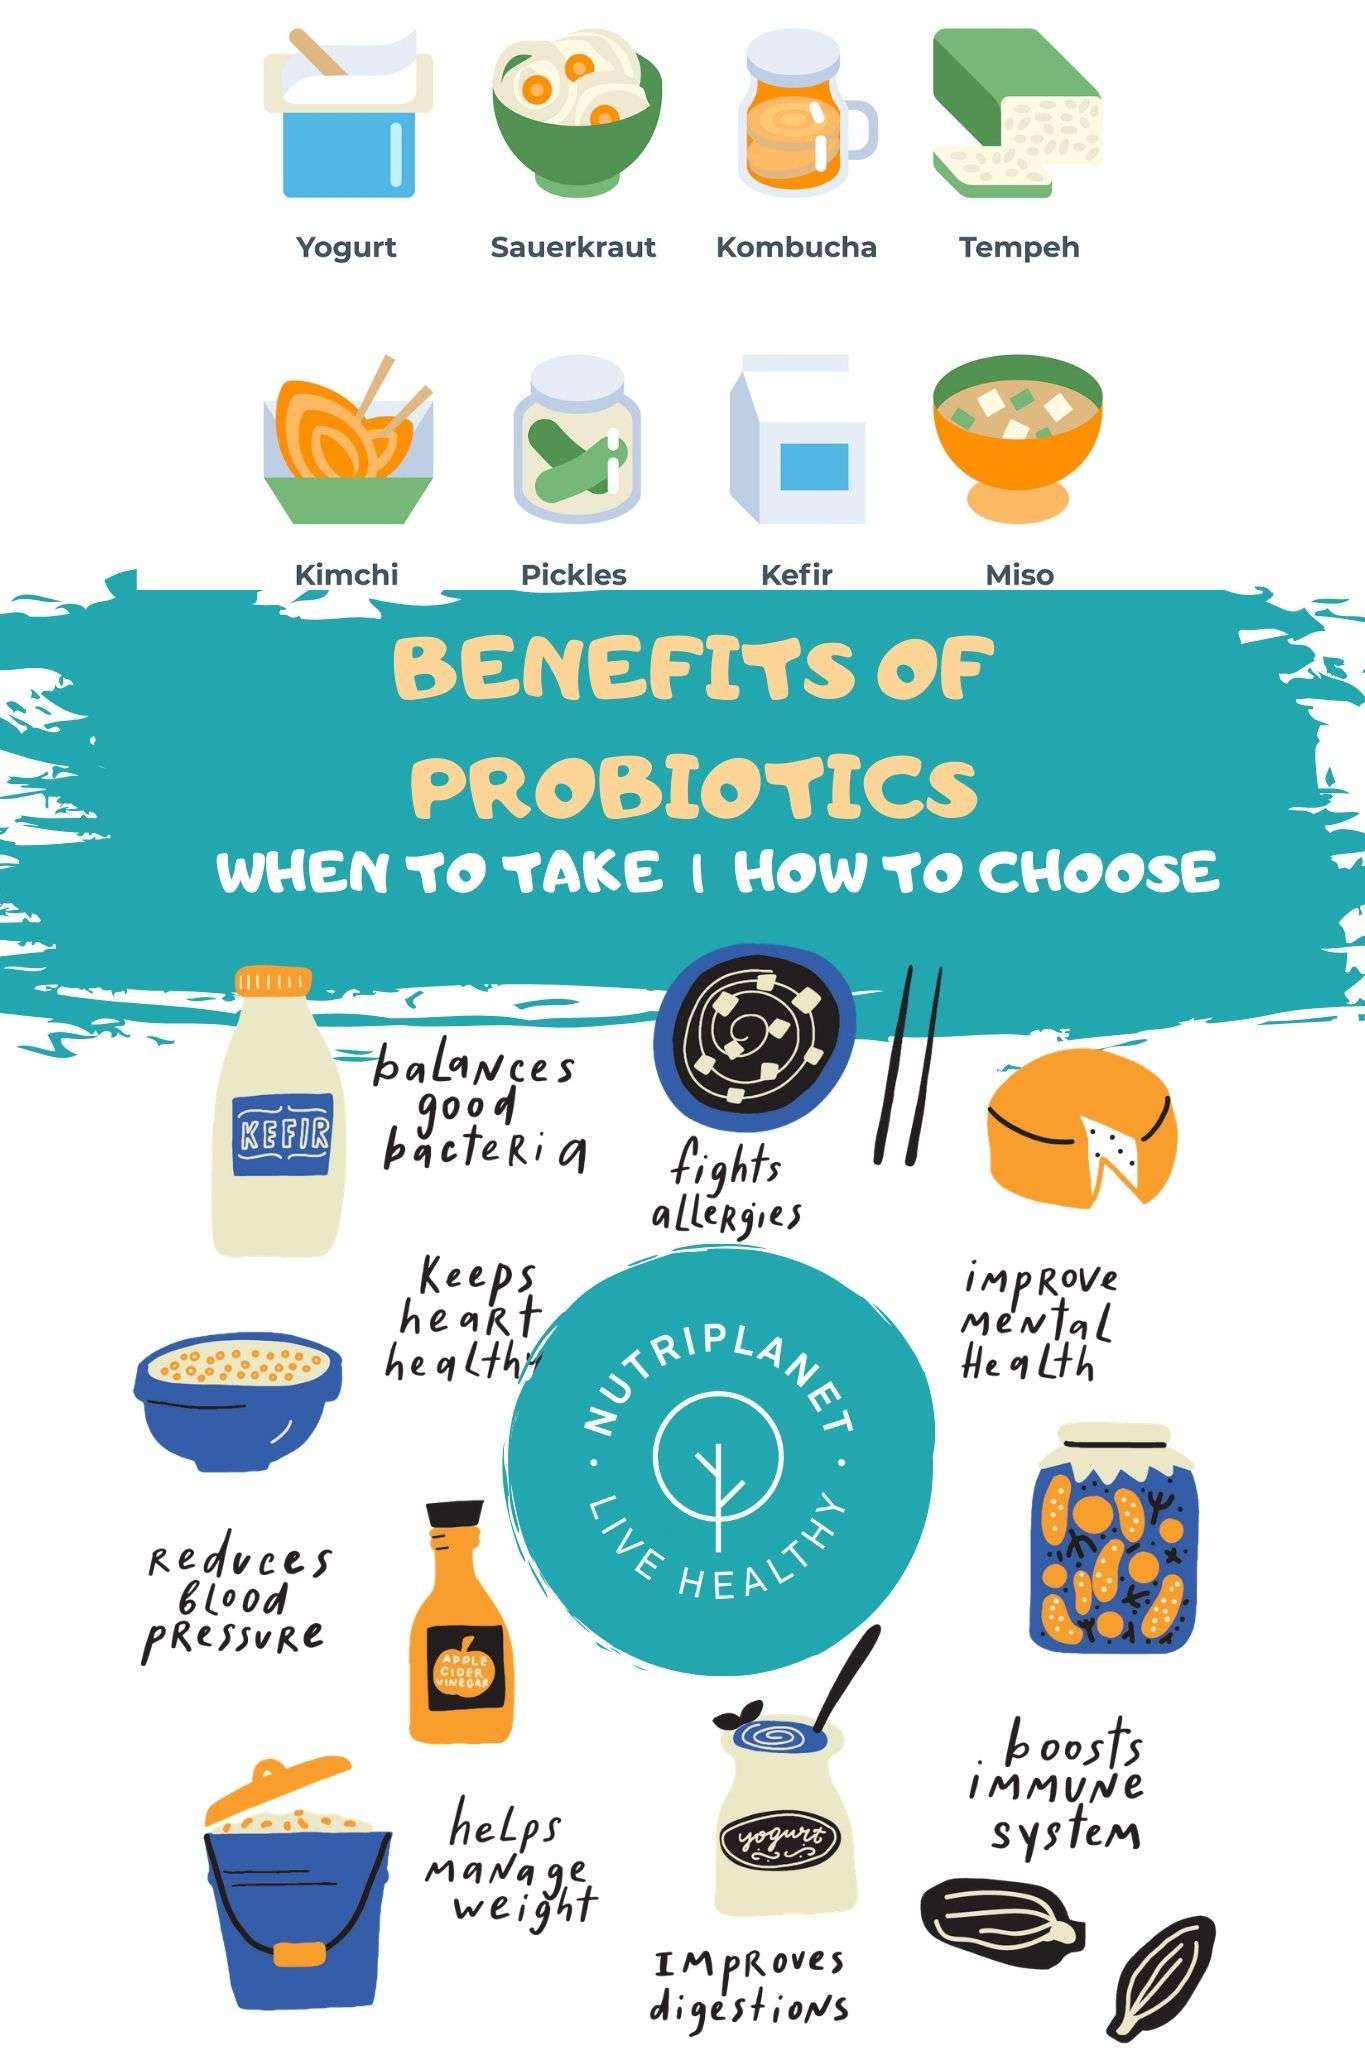 Probiotics: Benefits, How to Choose, When to Take